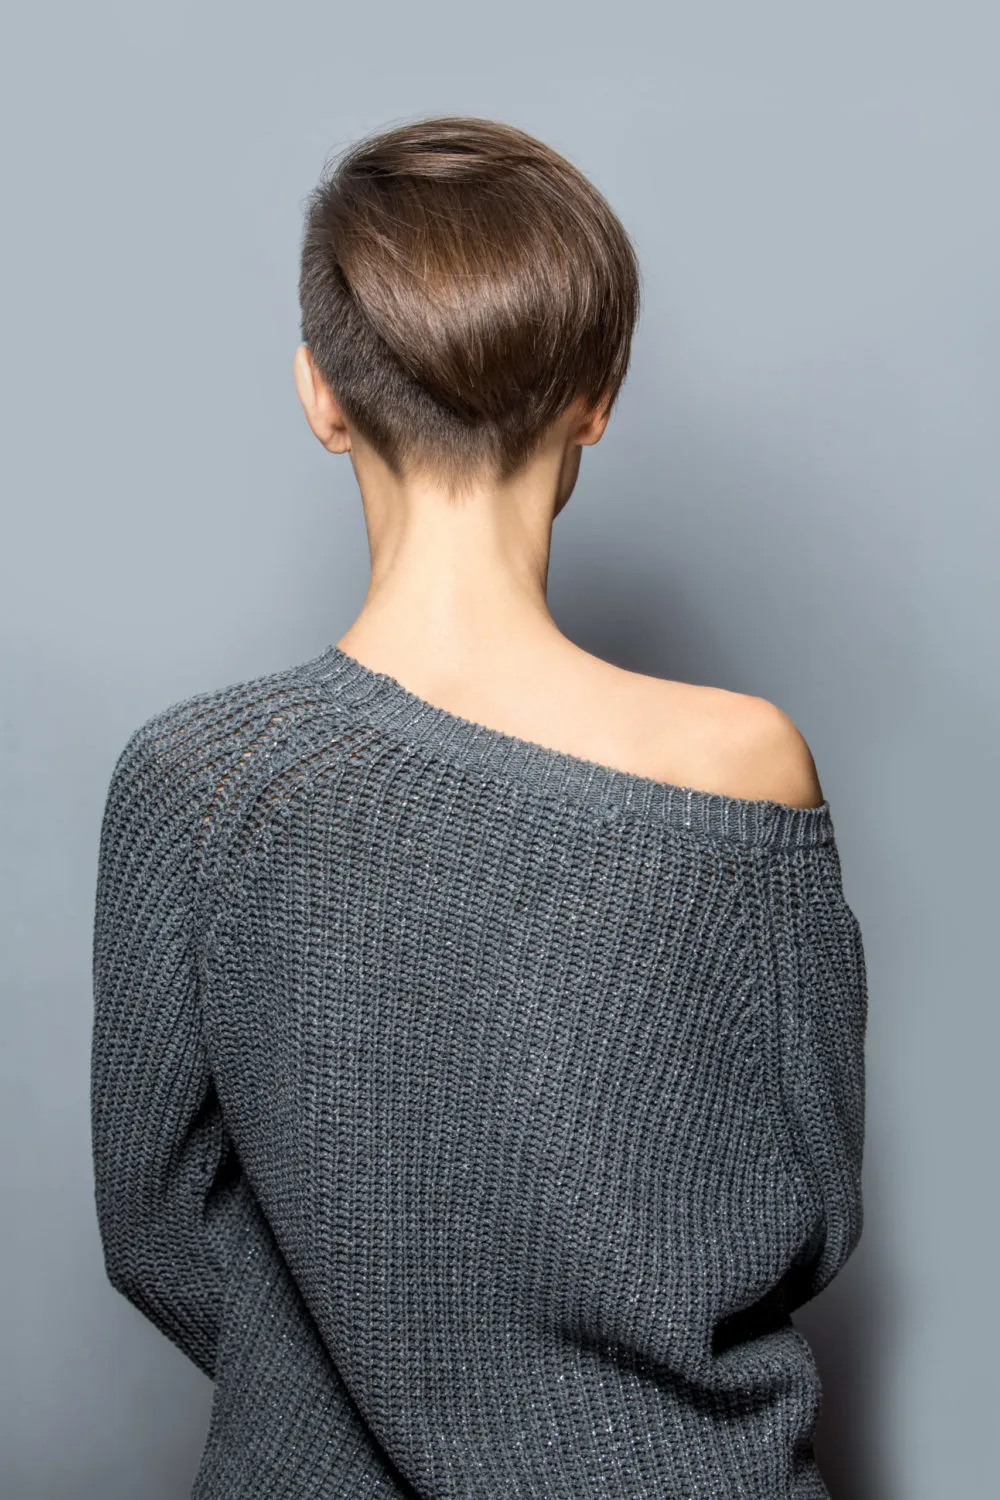 Long Pixie With Tapered Undercut , a featured short hairstyle for thick hair